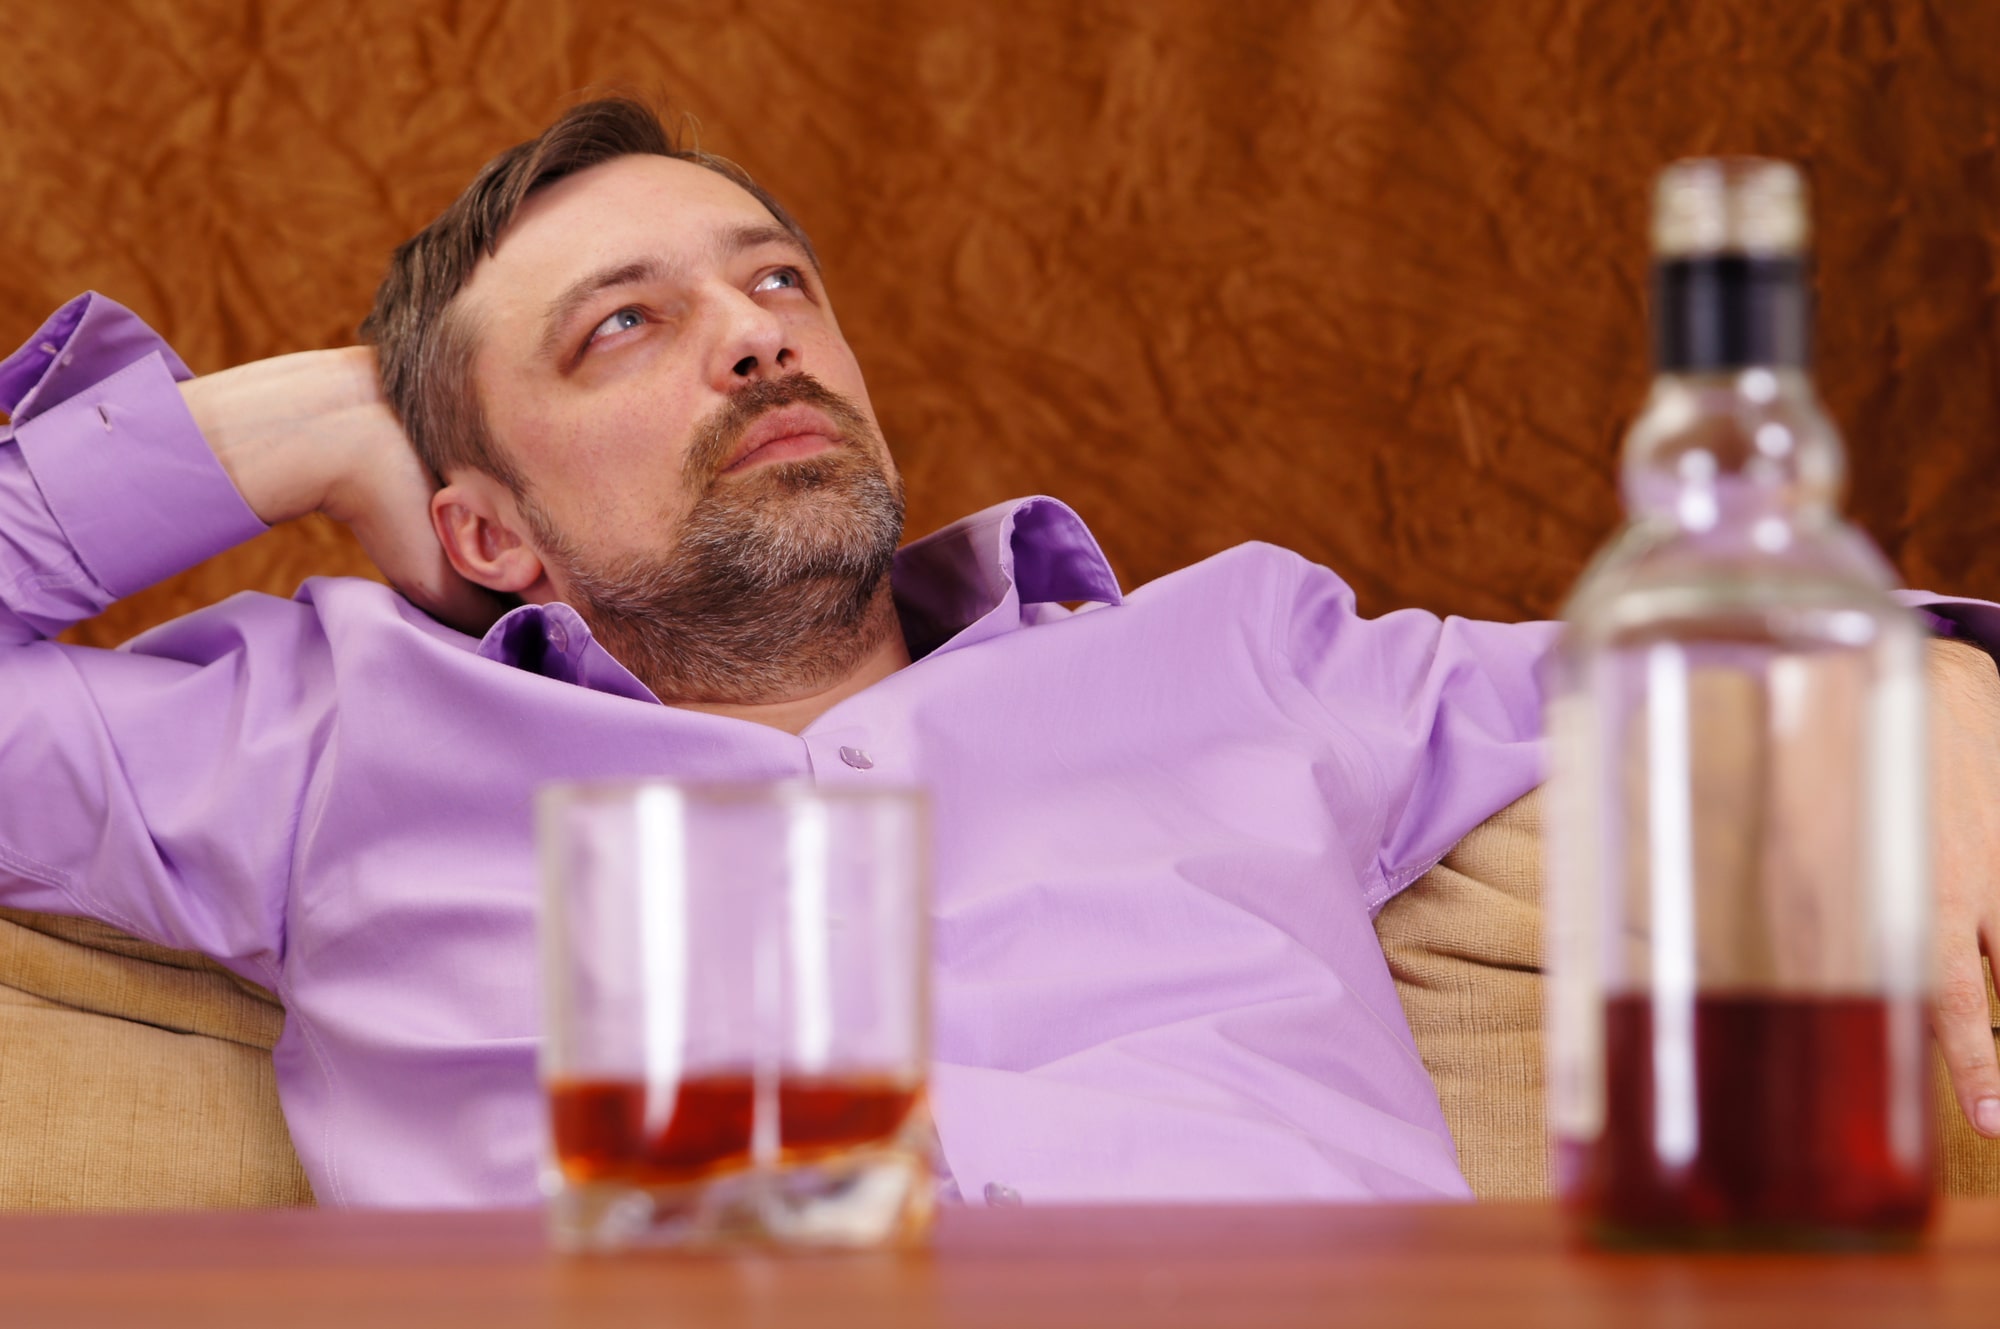 person wondering what they should expect during alcohol detox treatment